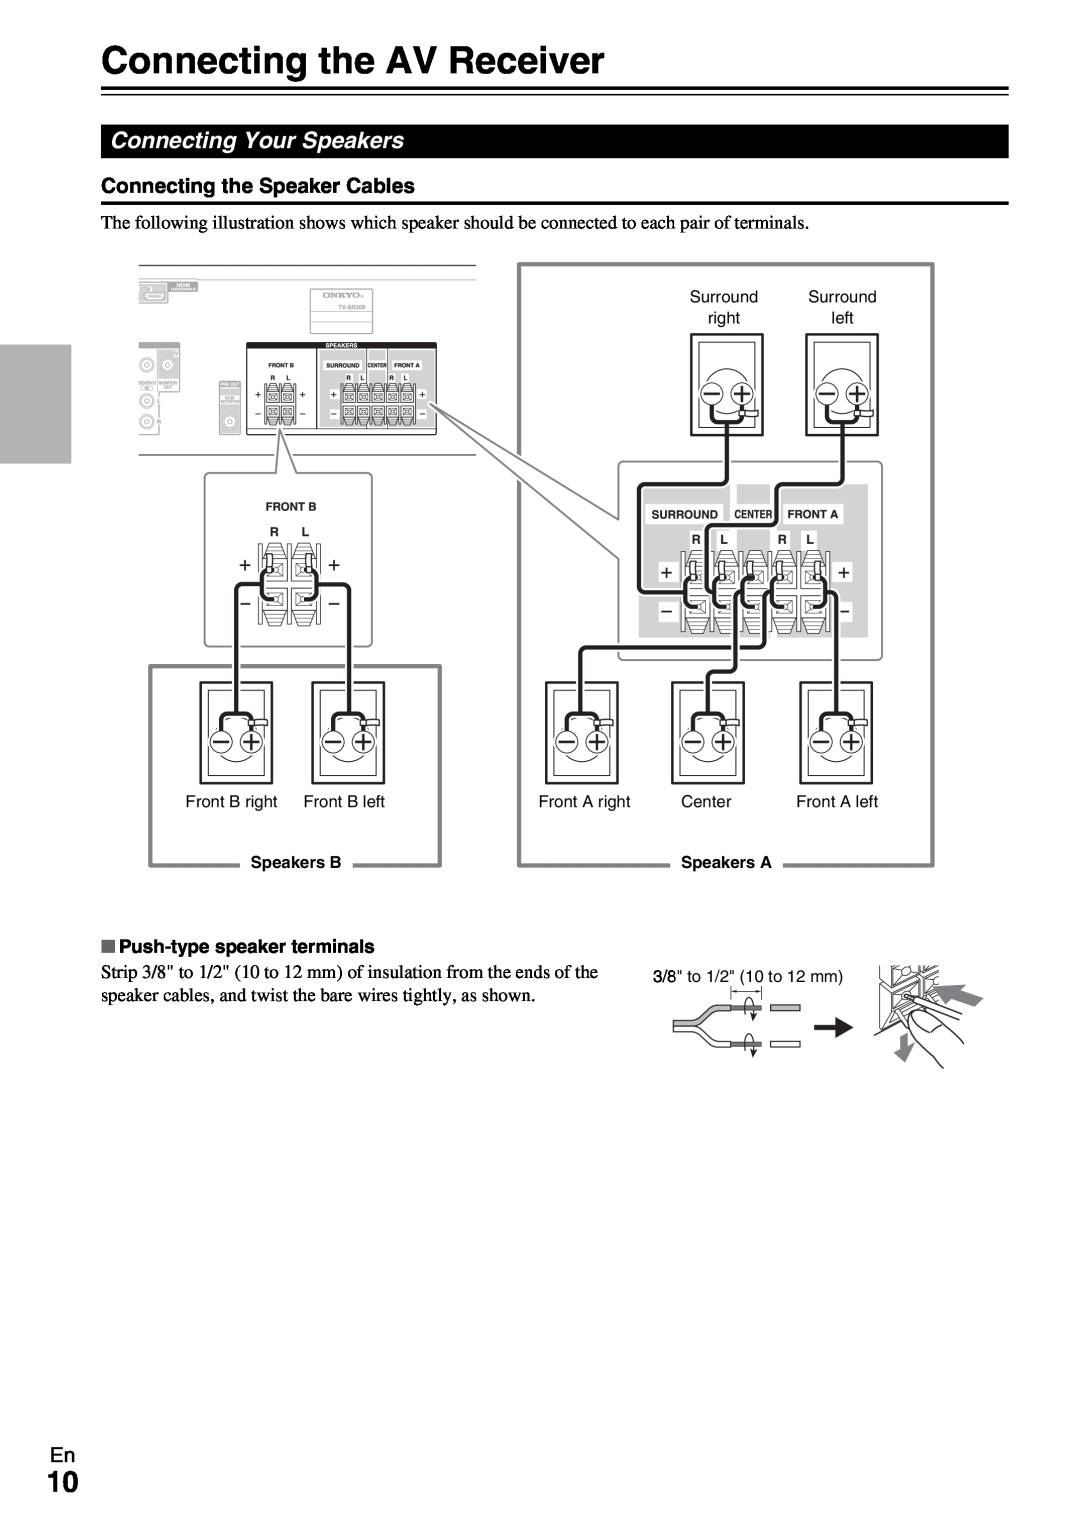 Onkyo TX-SR309 instruction manual Connecting the AV Receiver, Connecting Your Speakers, Connecting the Speaker Cables 